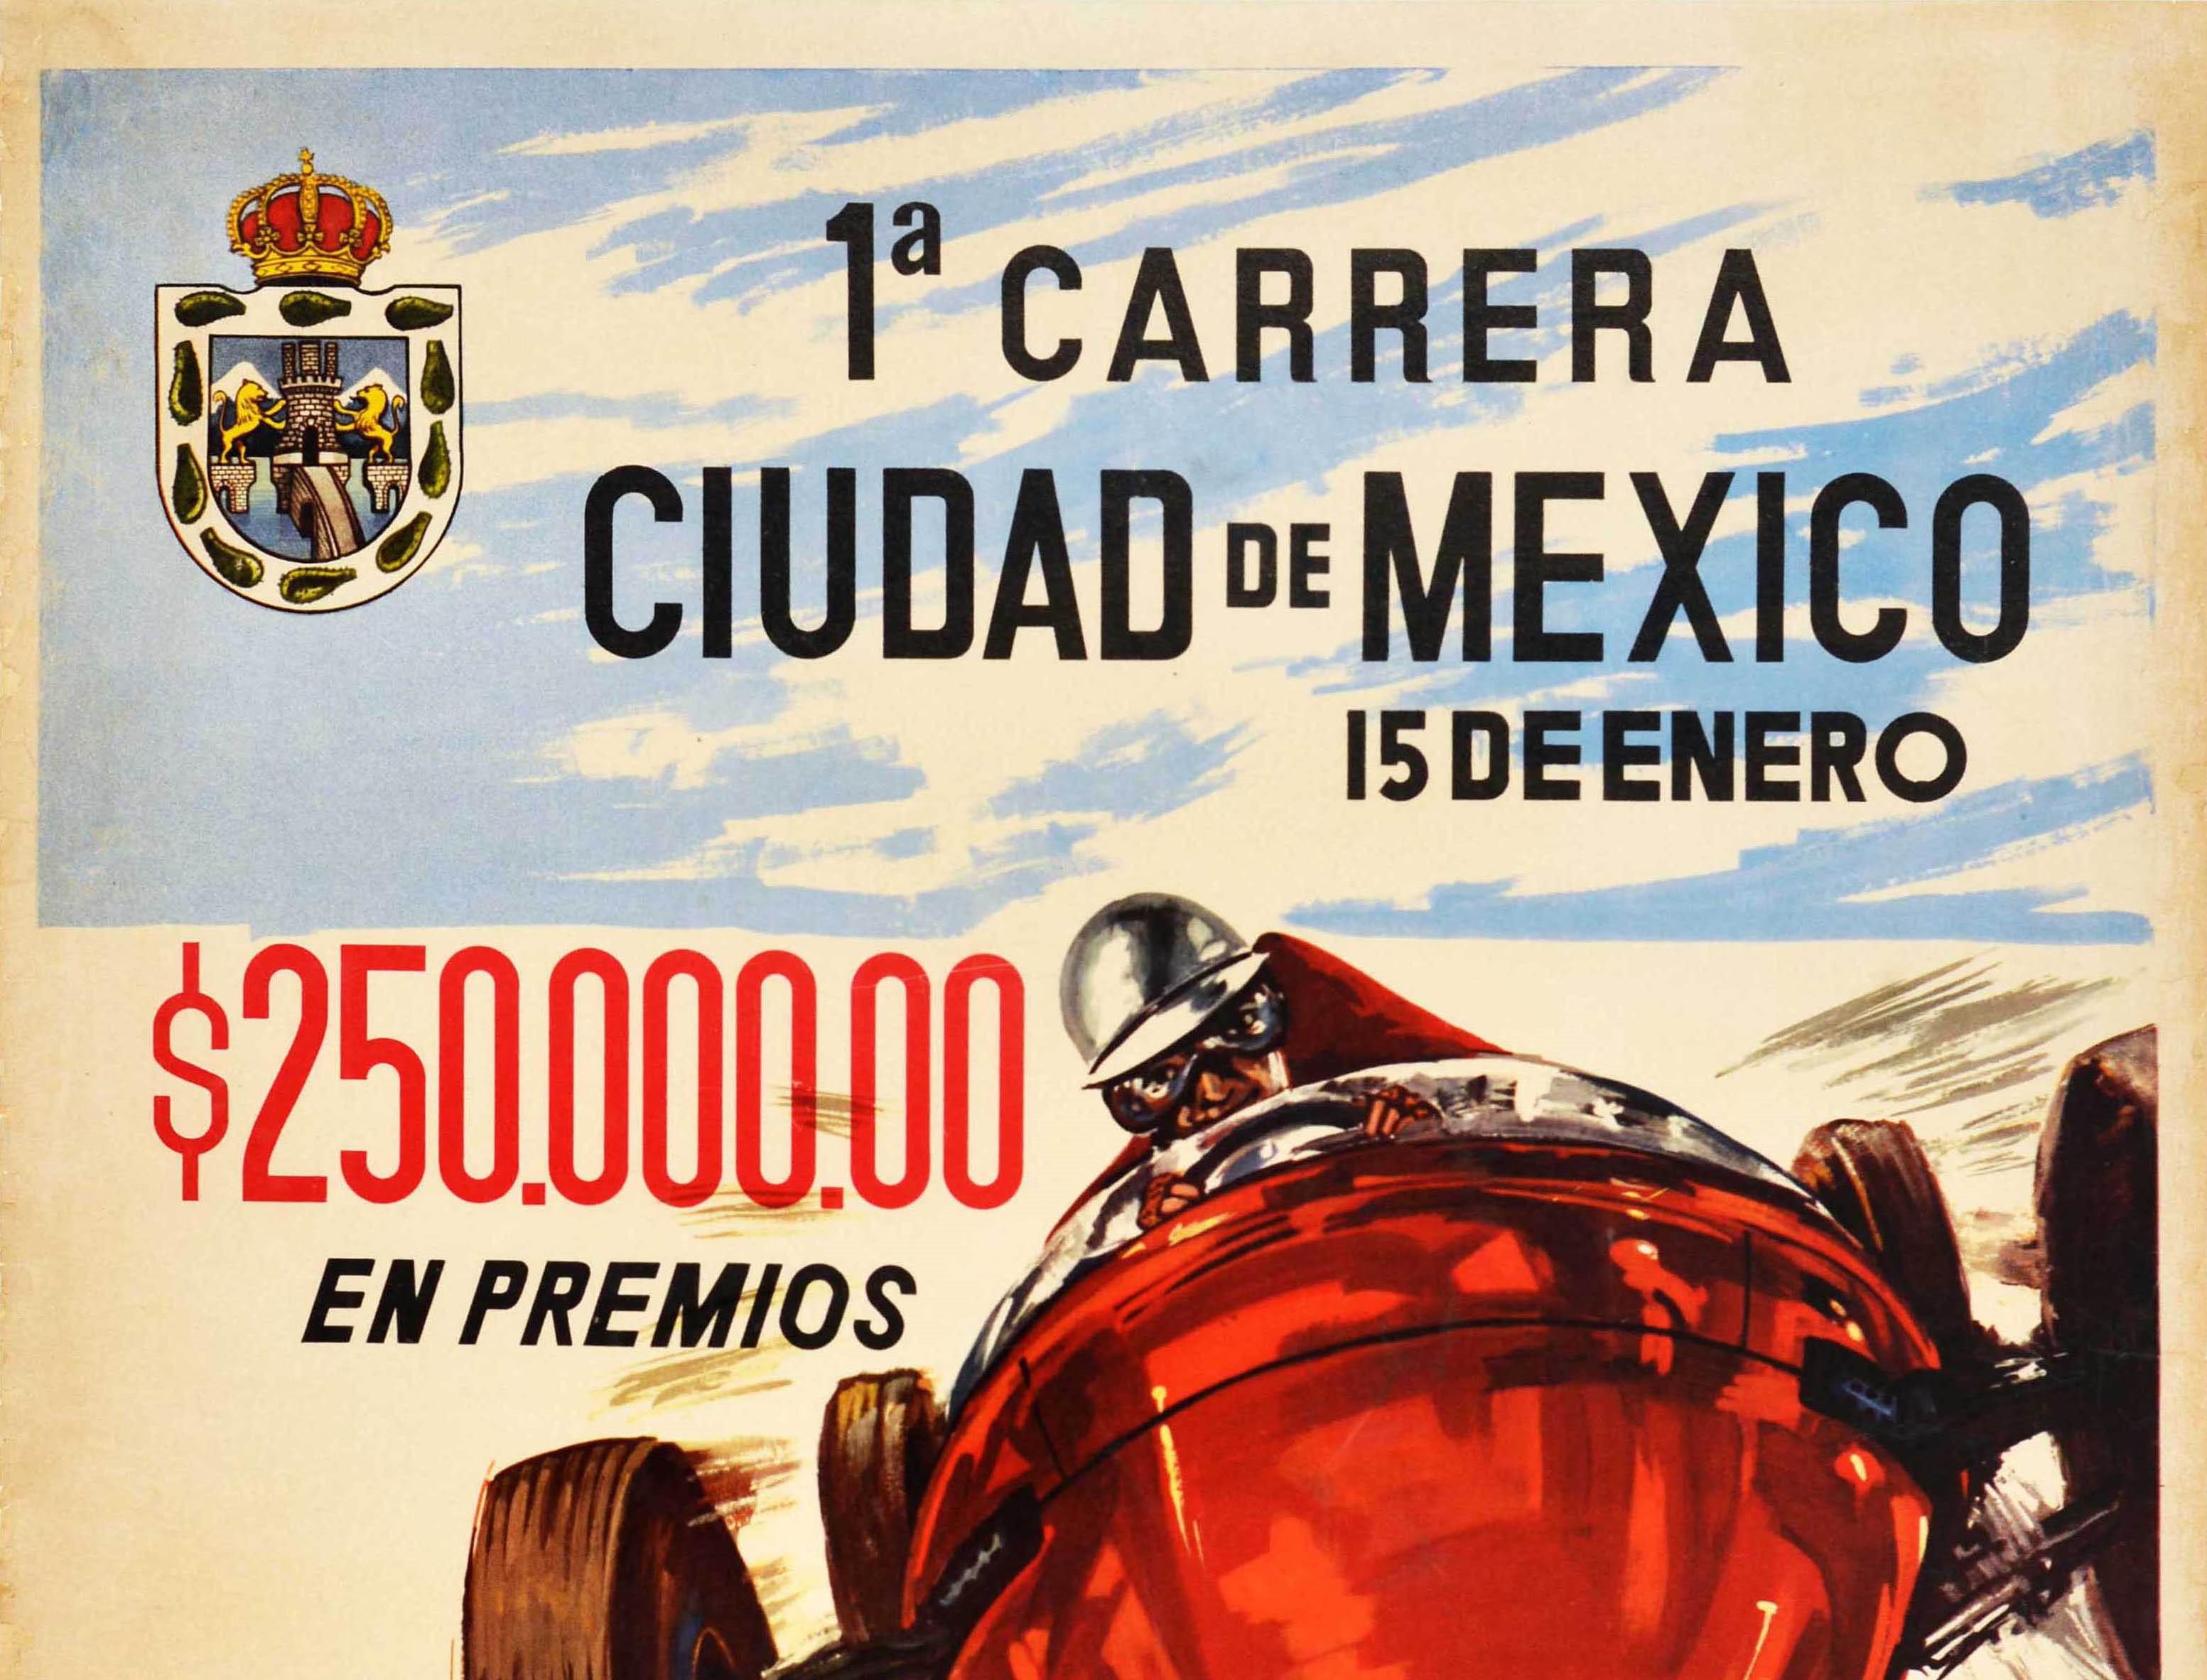 Original vintage motorsport poster for the 1a Carrera Ciudad de Mexico 15 de Enero / 1st Mexico City Race on 15 January featuring a dynamic design showing a driver in a helmet and goggles racing a classic car at speed towards the viewer with the